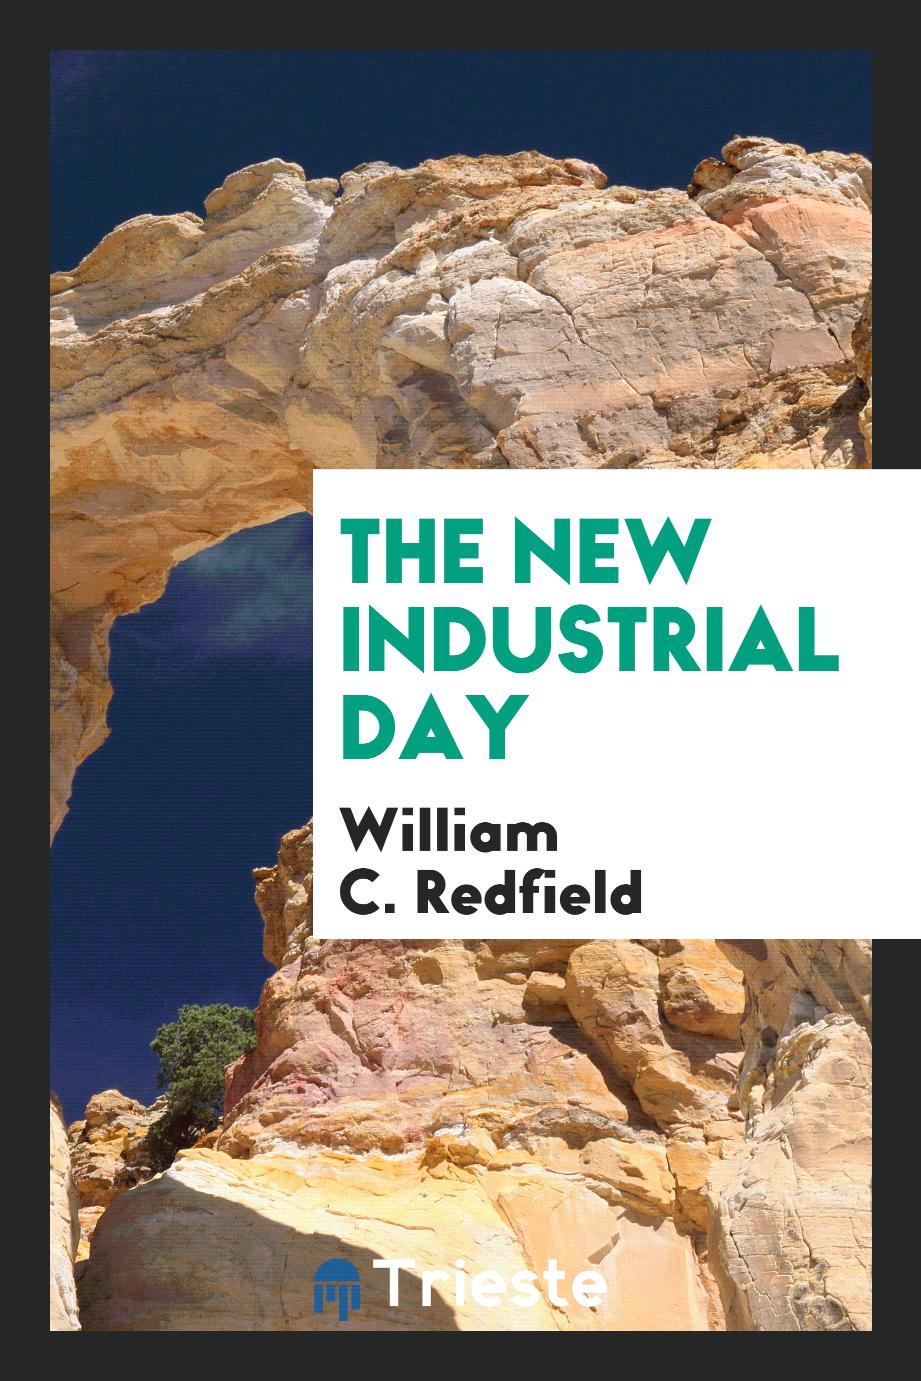 The new industrial day